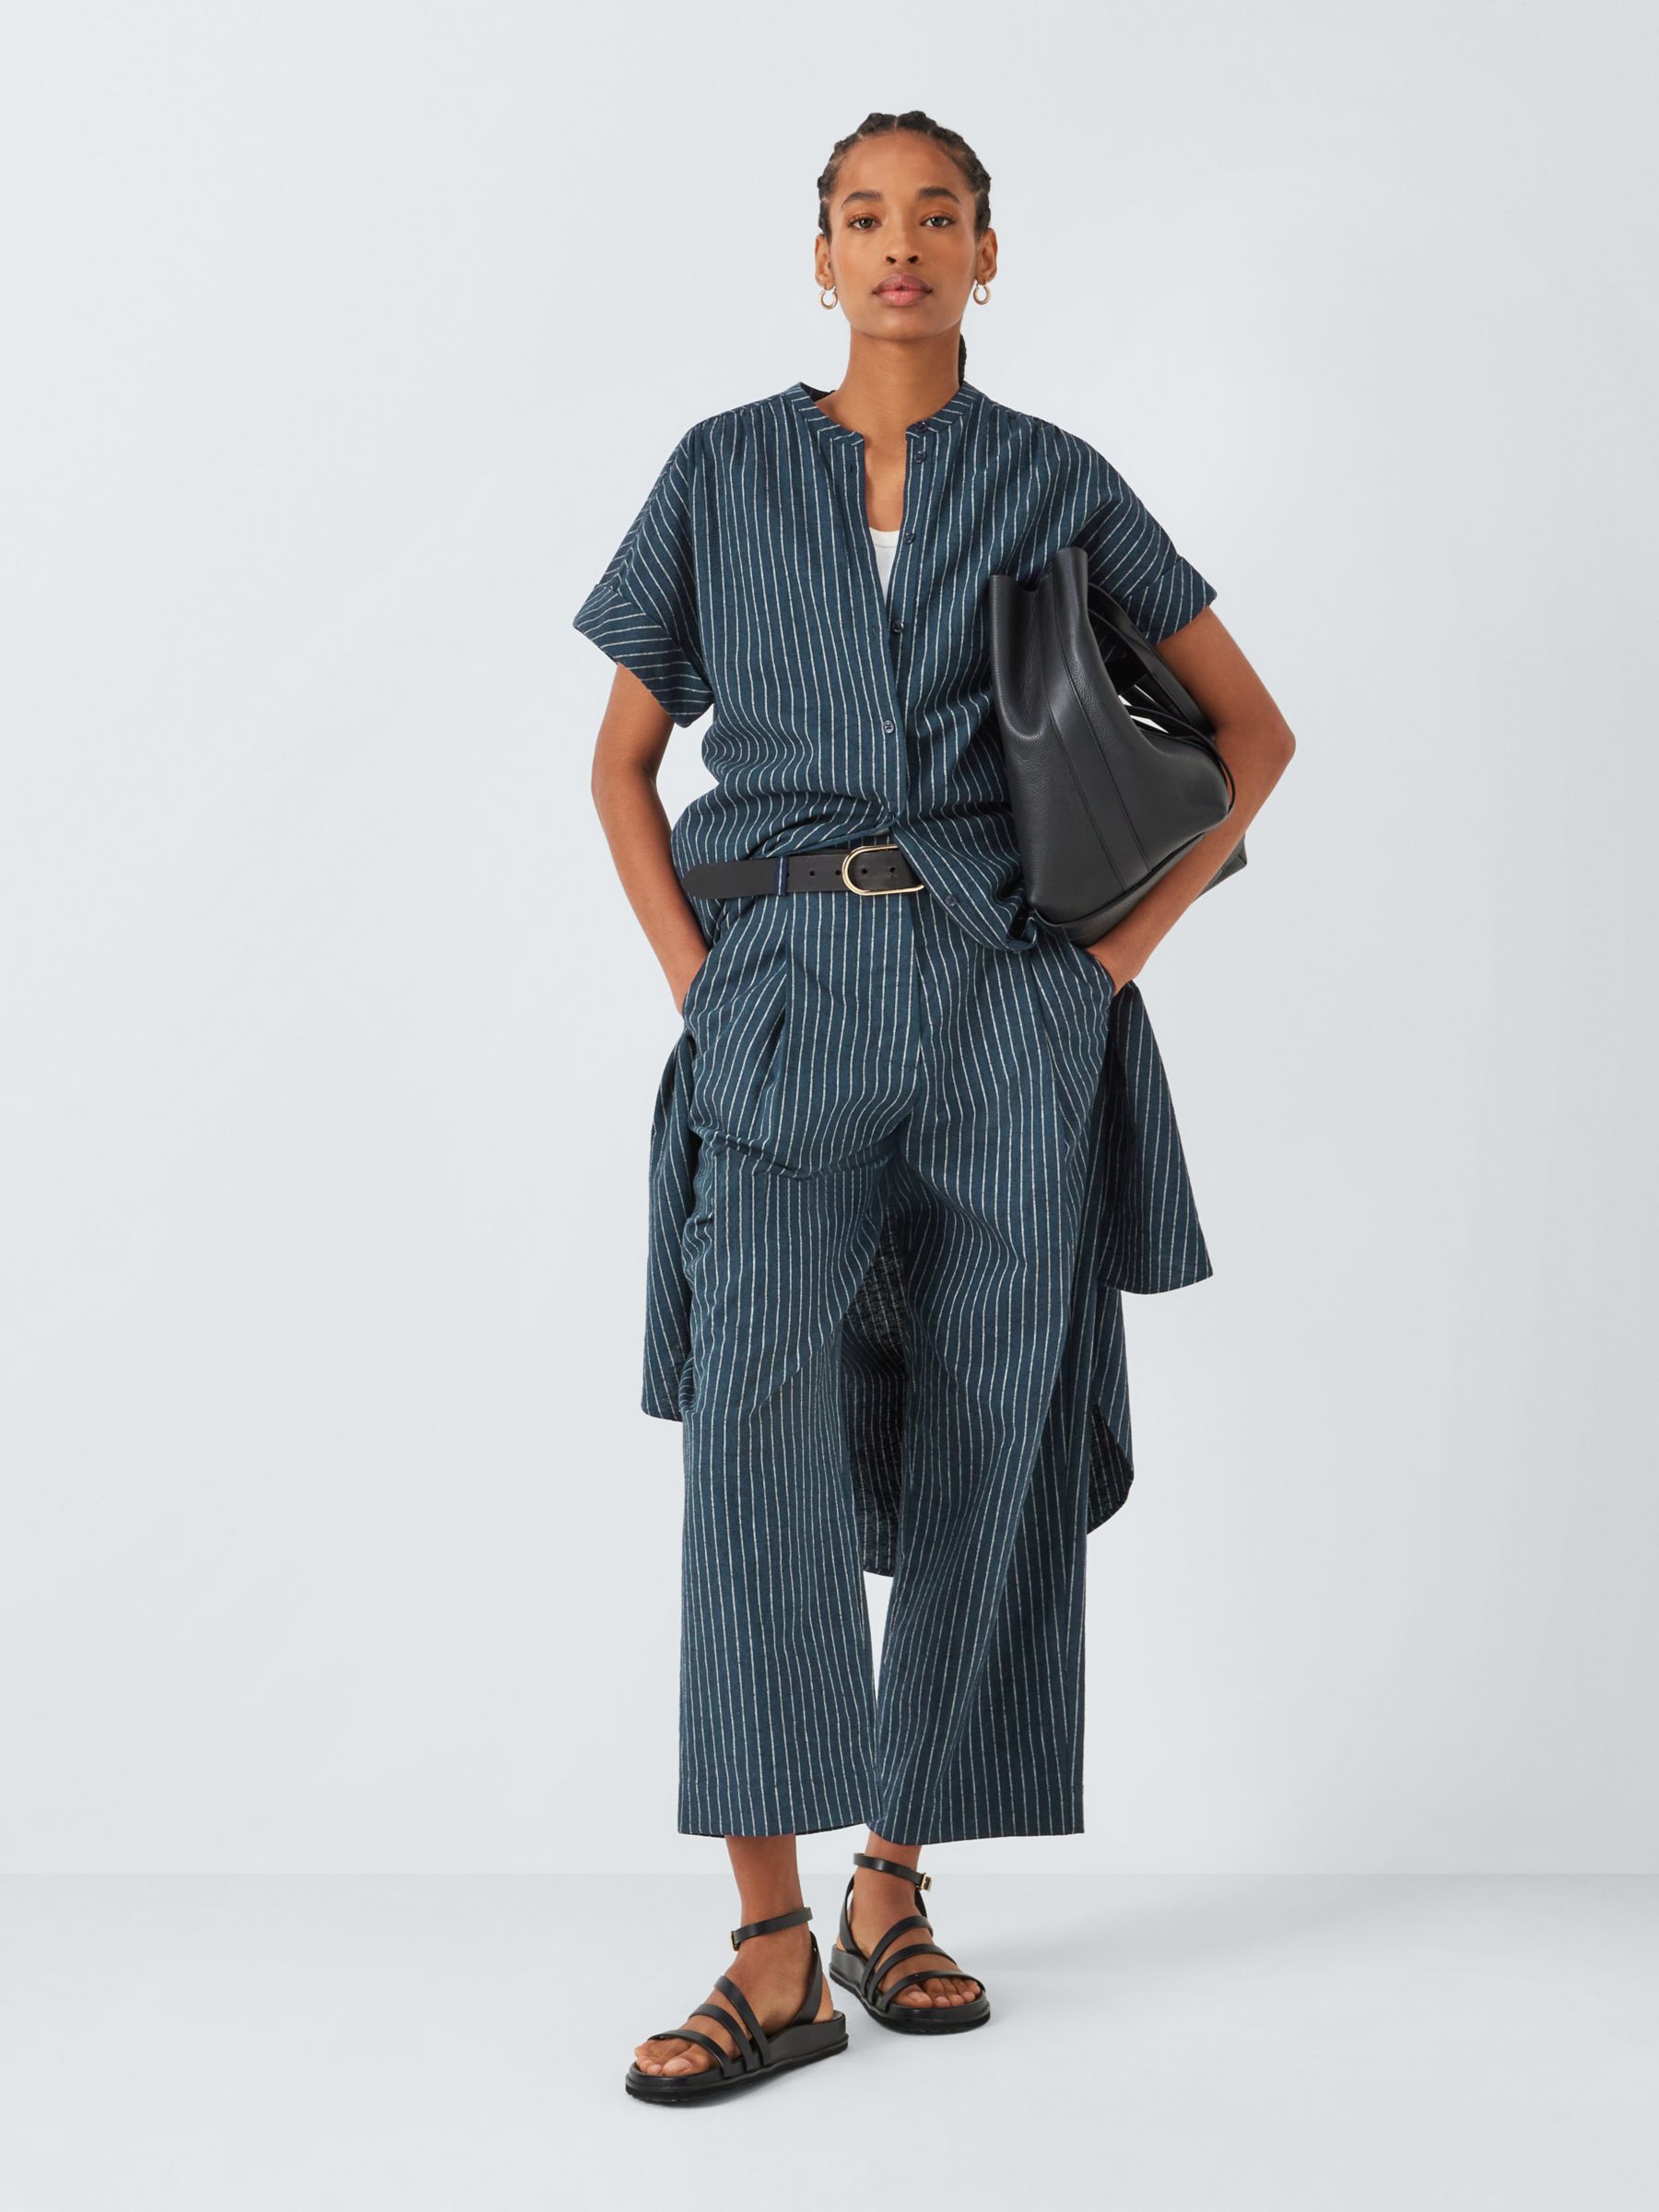 Buy John Lewis Stripe Linen Cropped Trousers Online at johnlewis.com